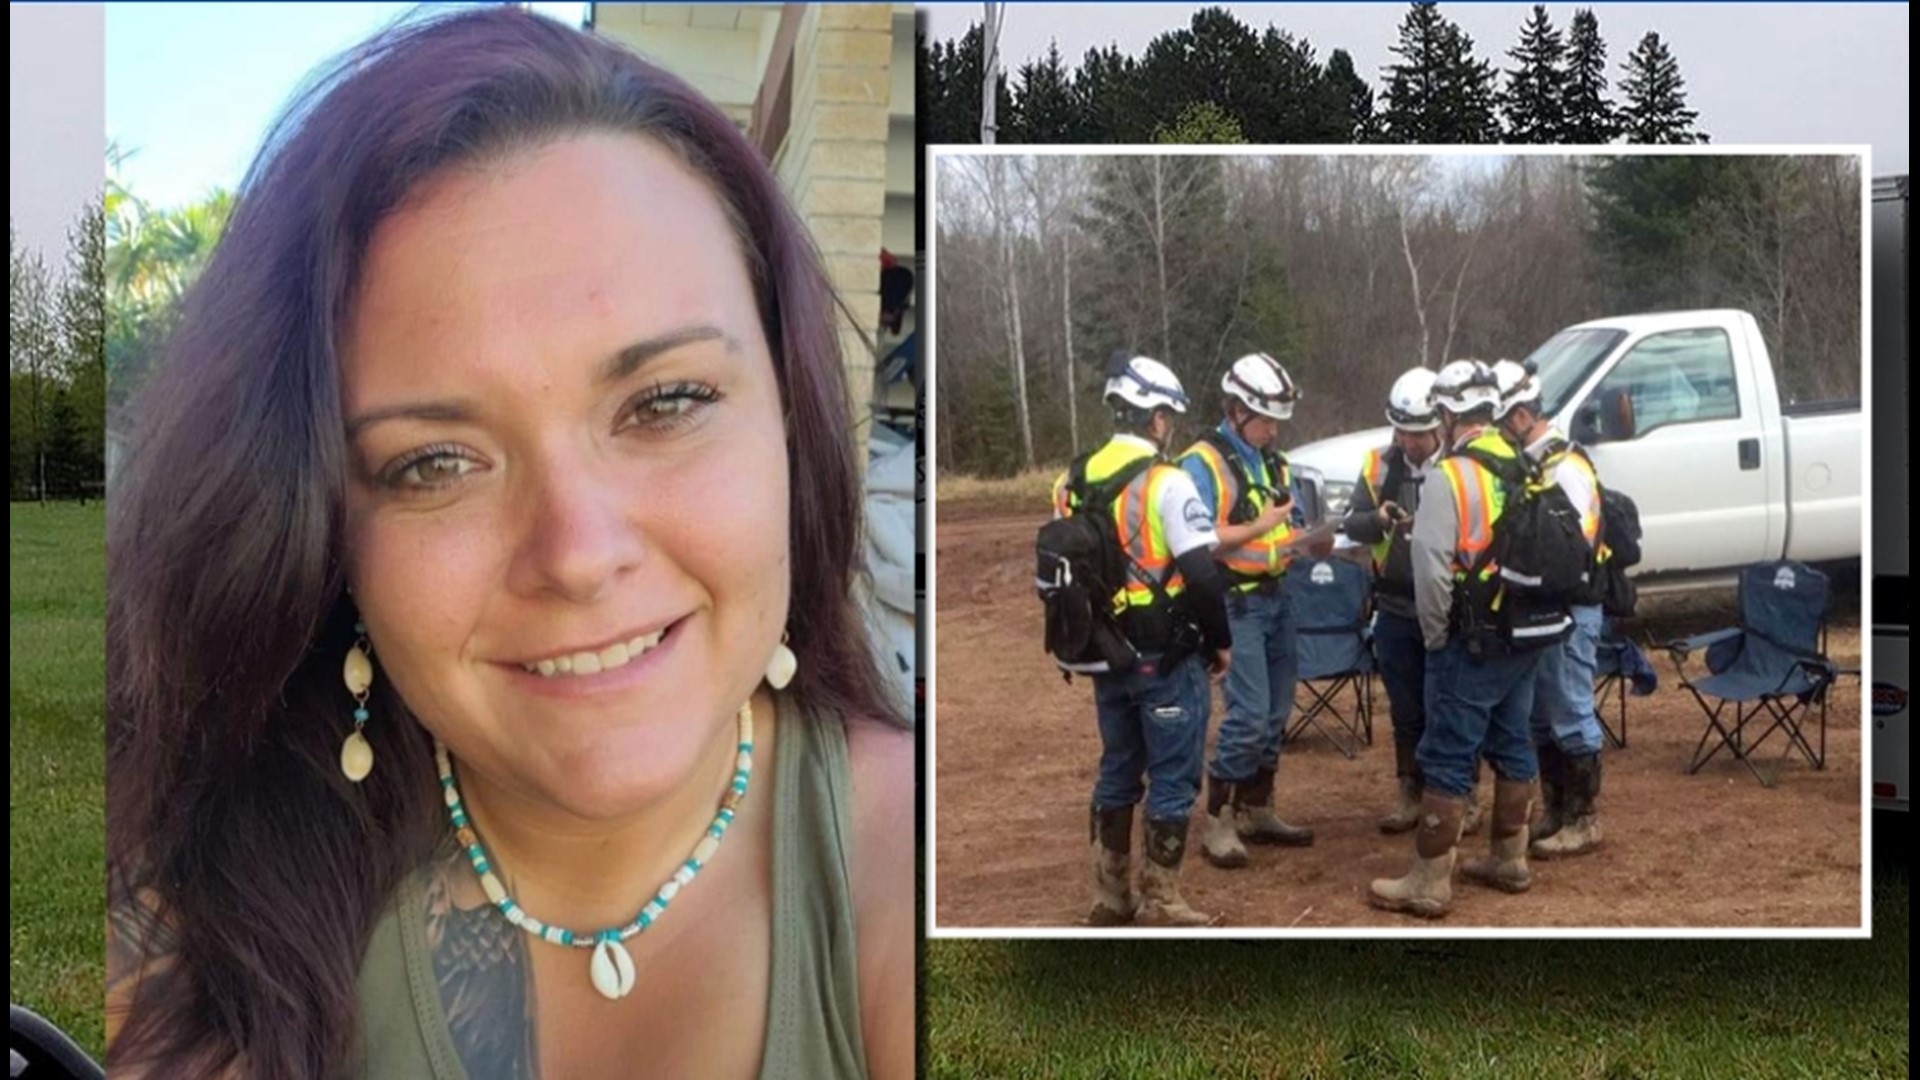 Minnesota Search & Rescue Christian Aid Ministries found human remains Sat. morning believed to be Ashley Miller Carlson, which private investigators confirmed.